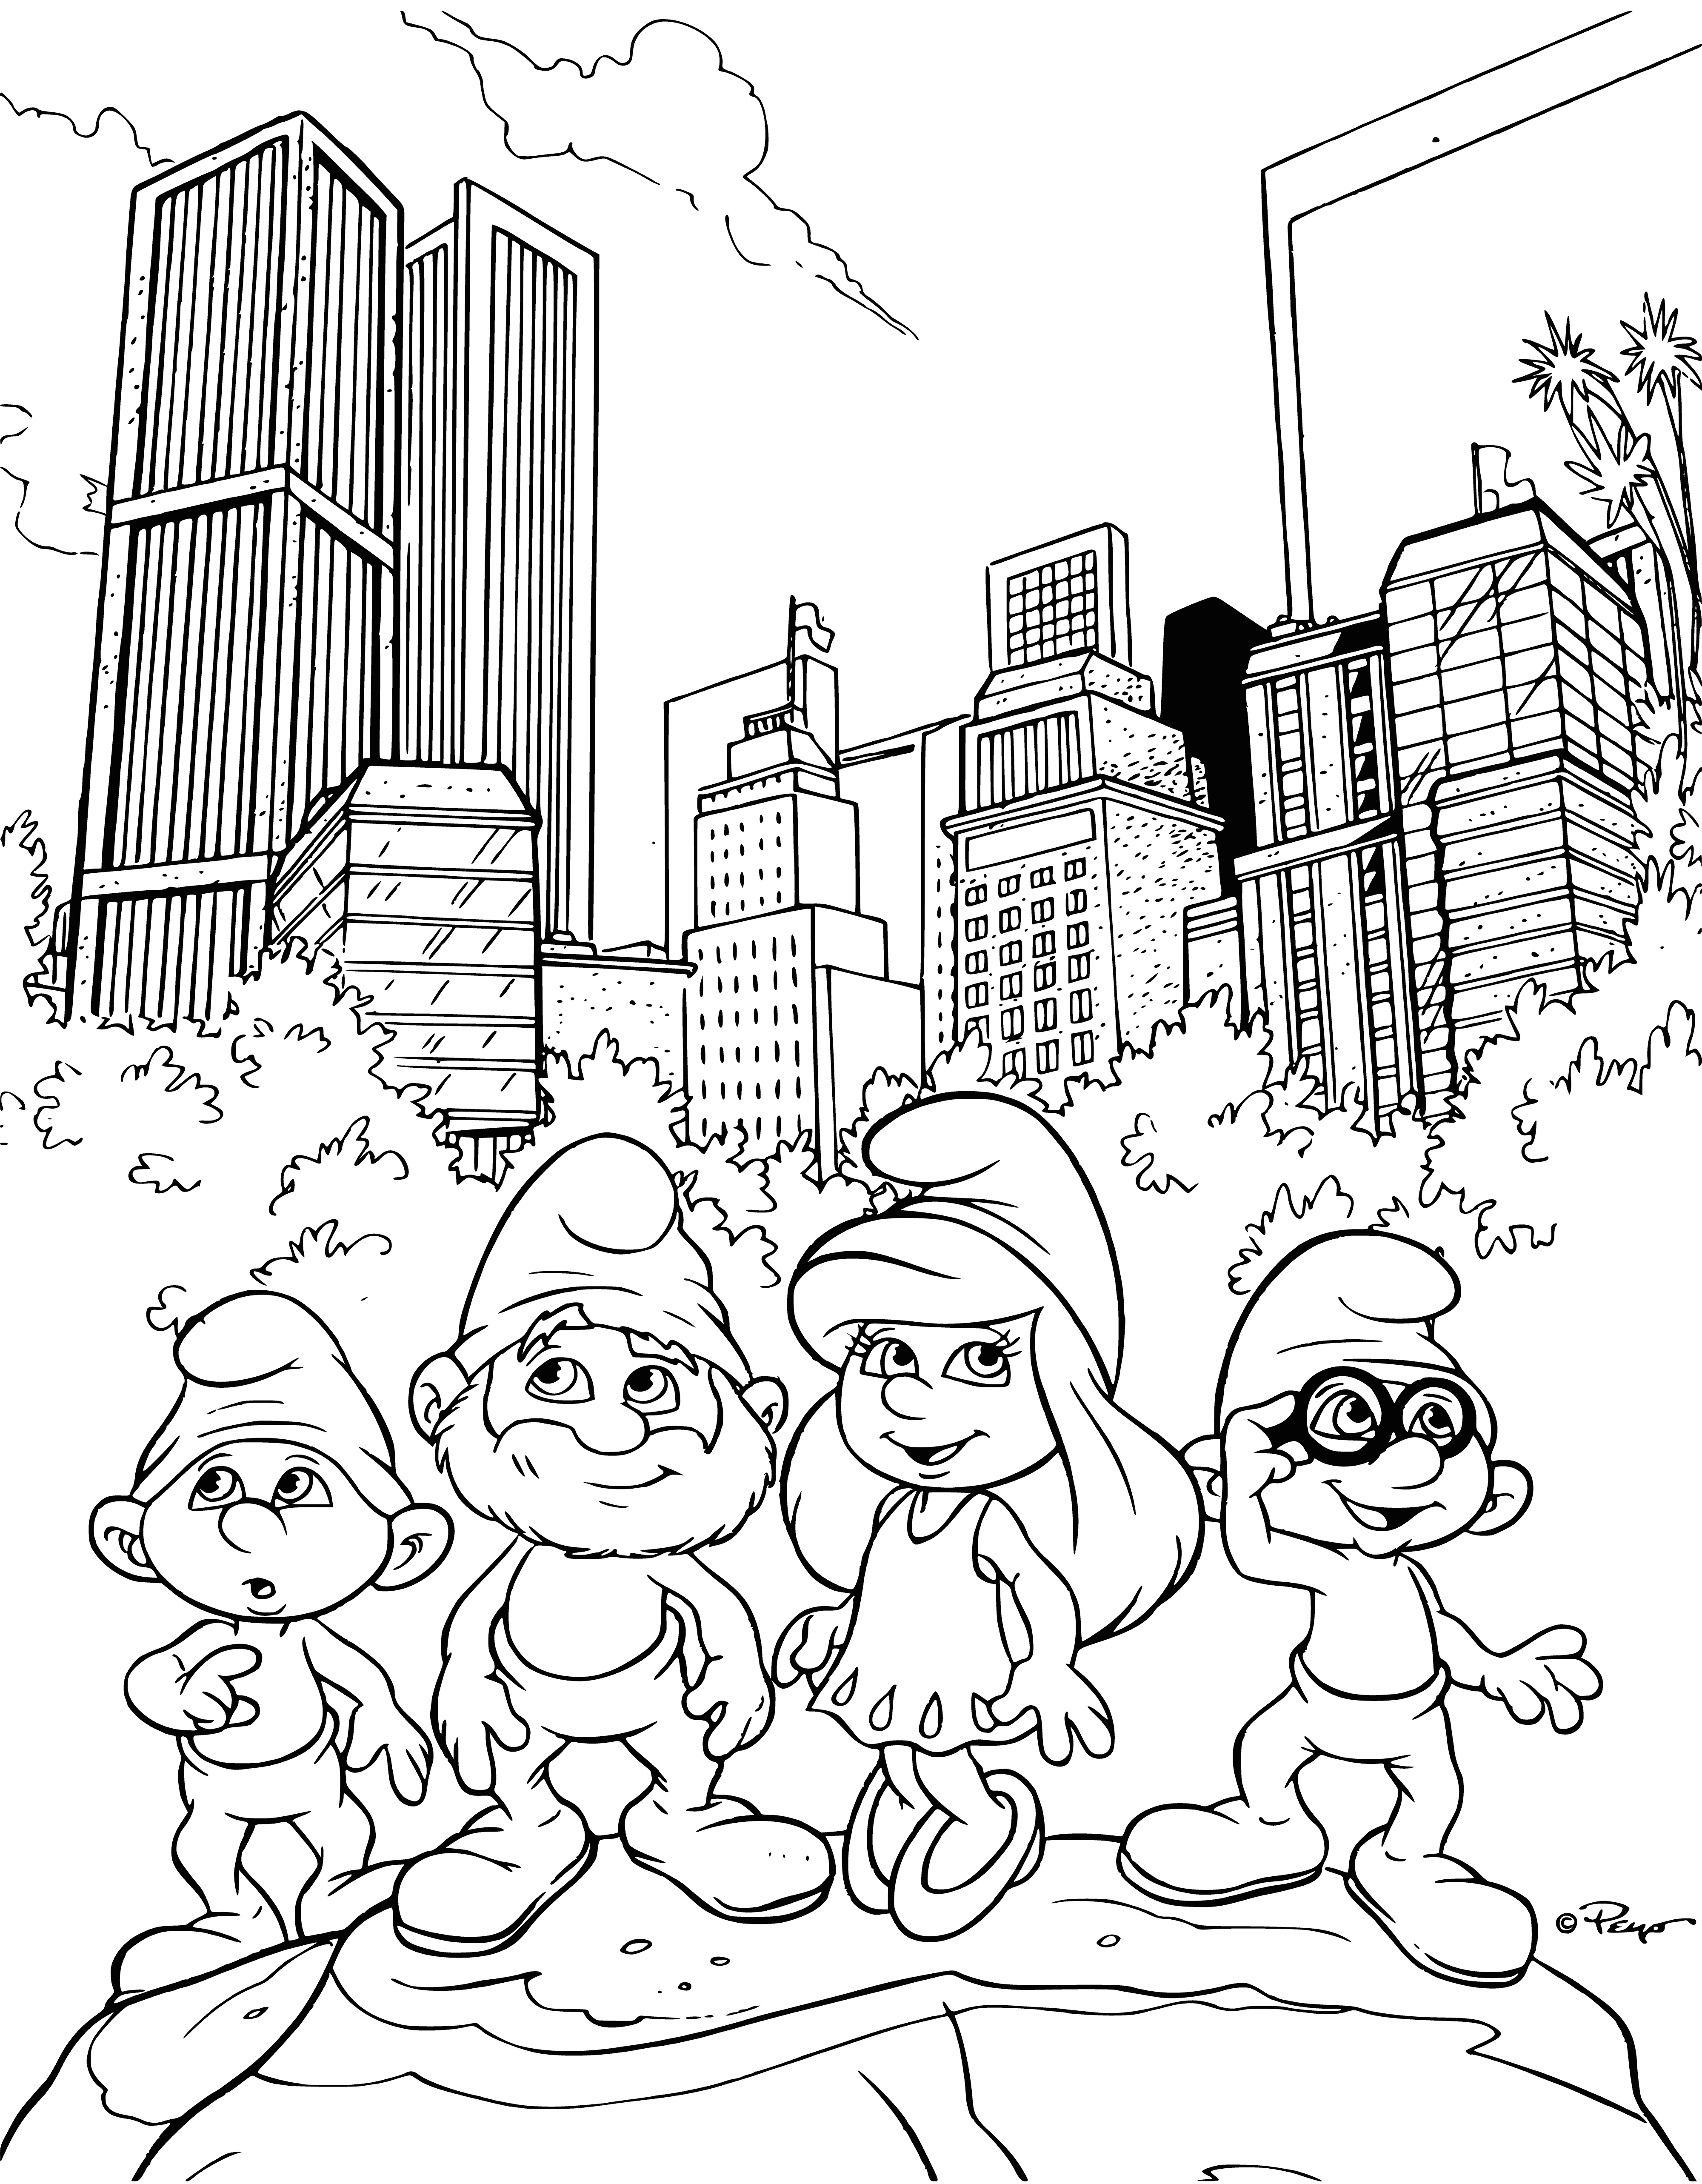 coloring page: Three blue smurfs chatting on a city street surrounded by tall buildings.